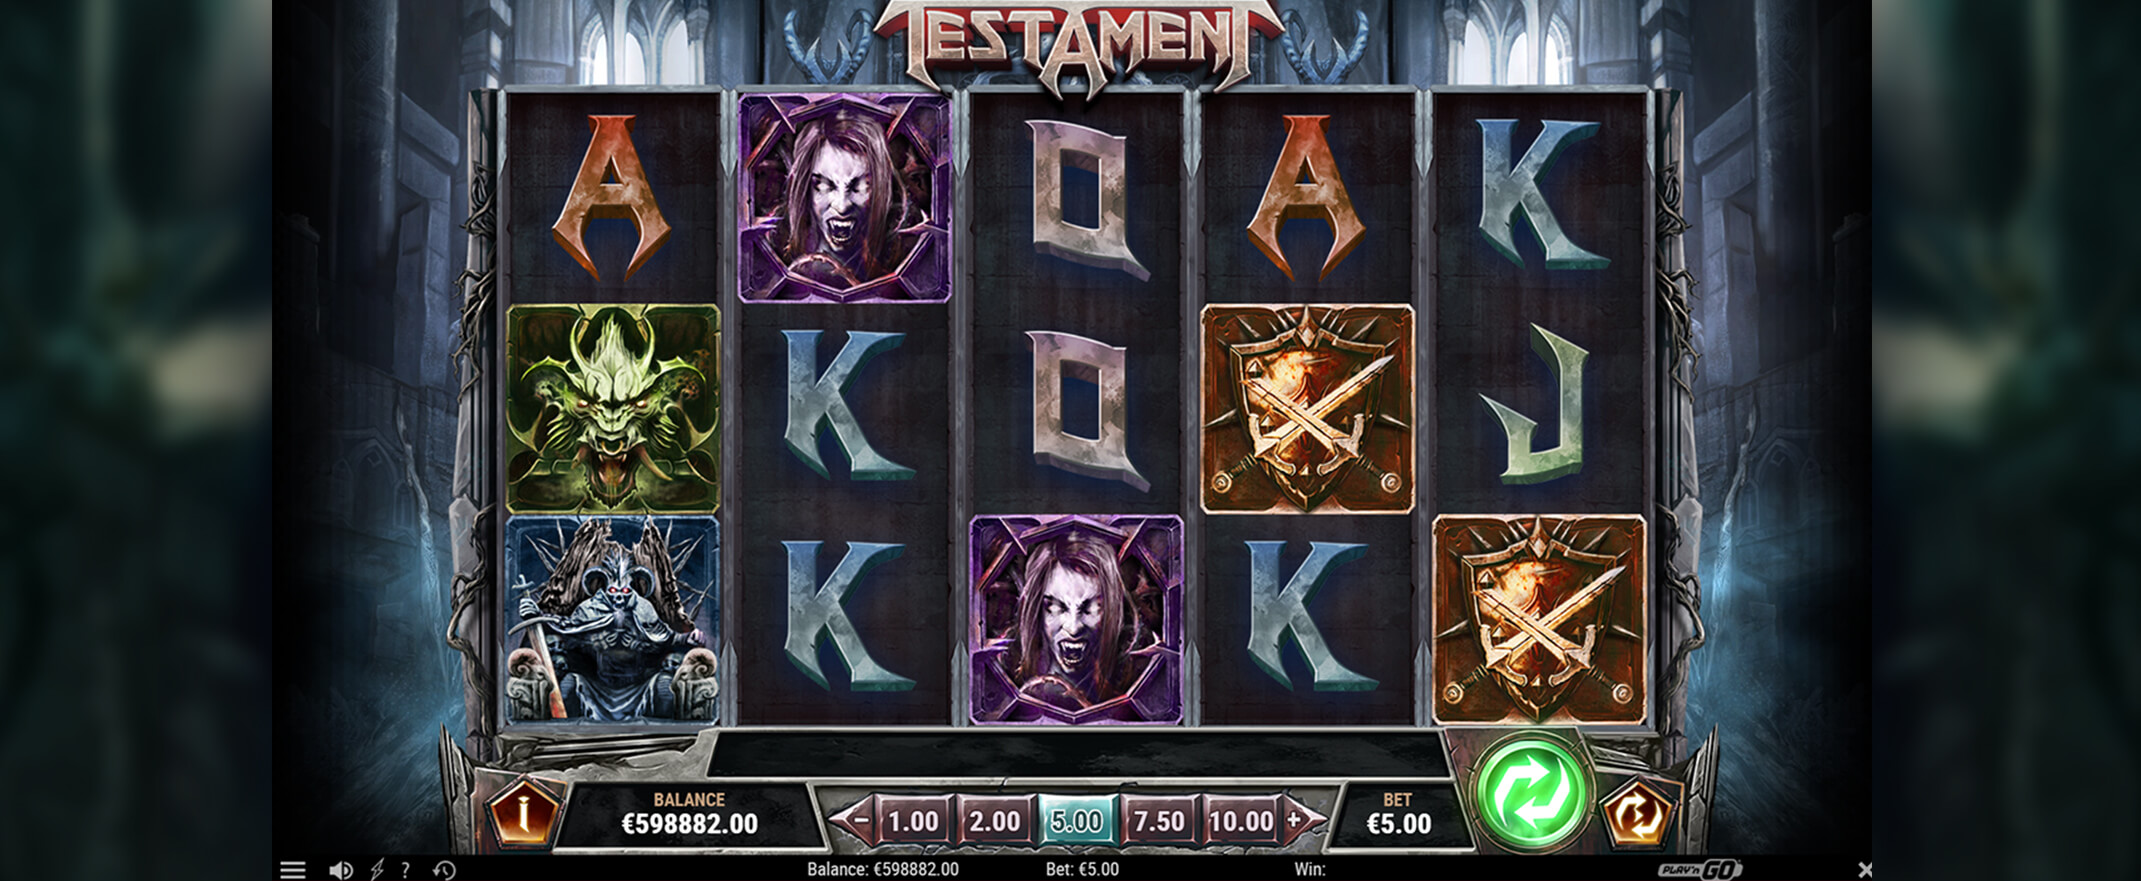 Testament slot from Play'n Go - an image of the reels